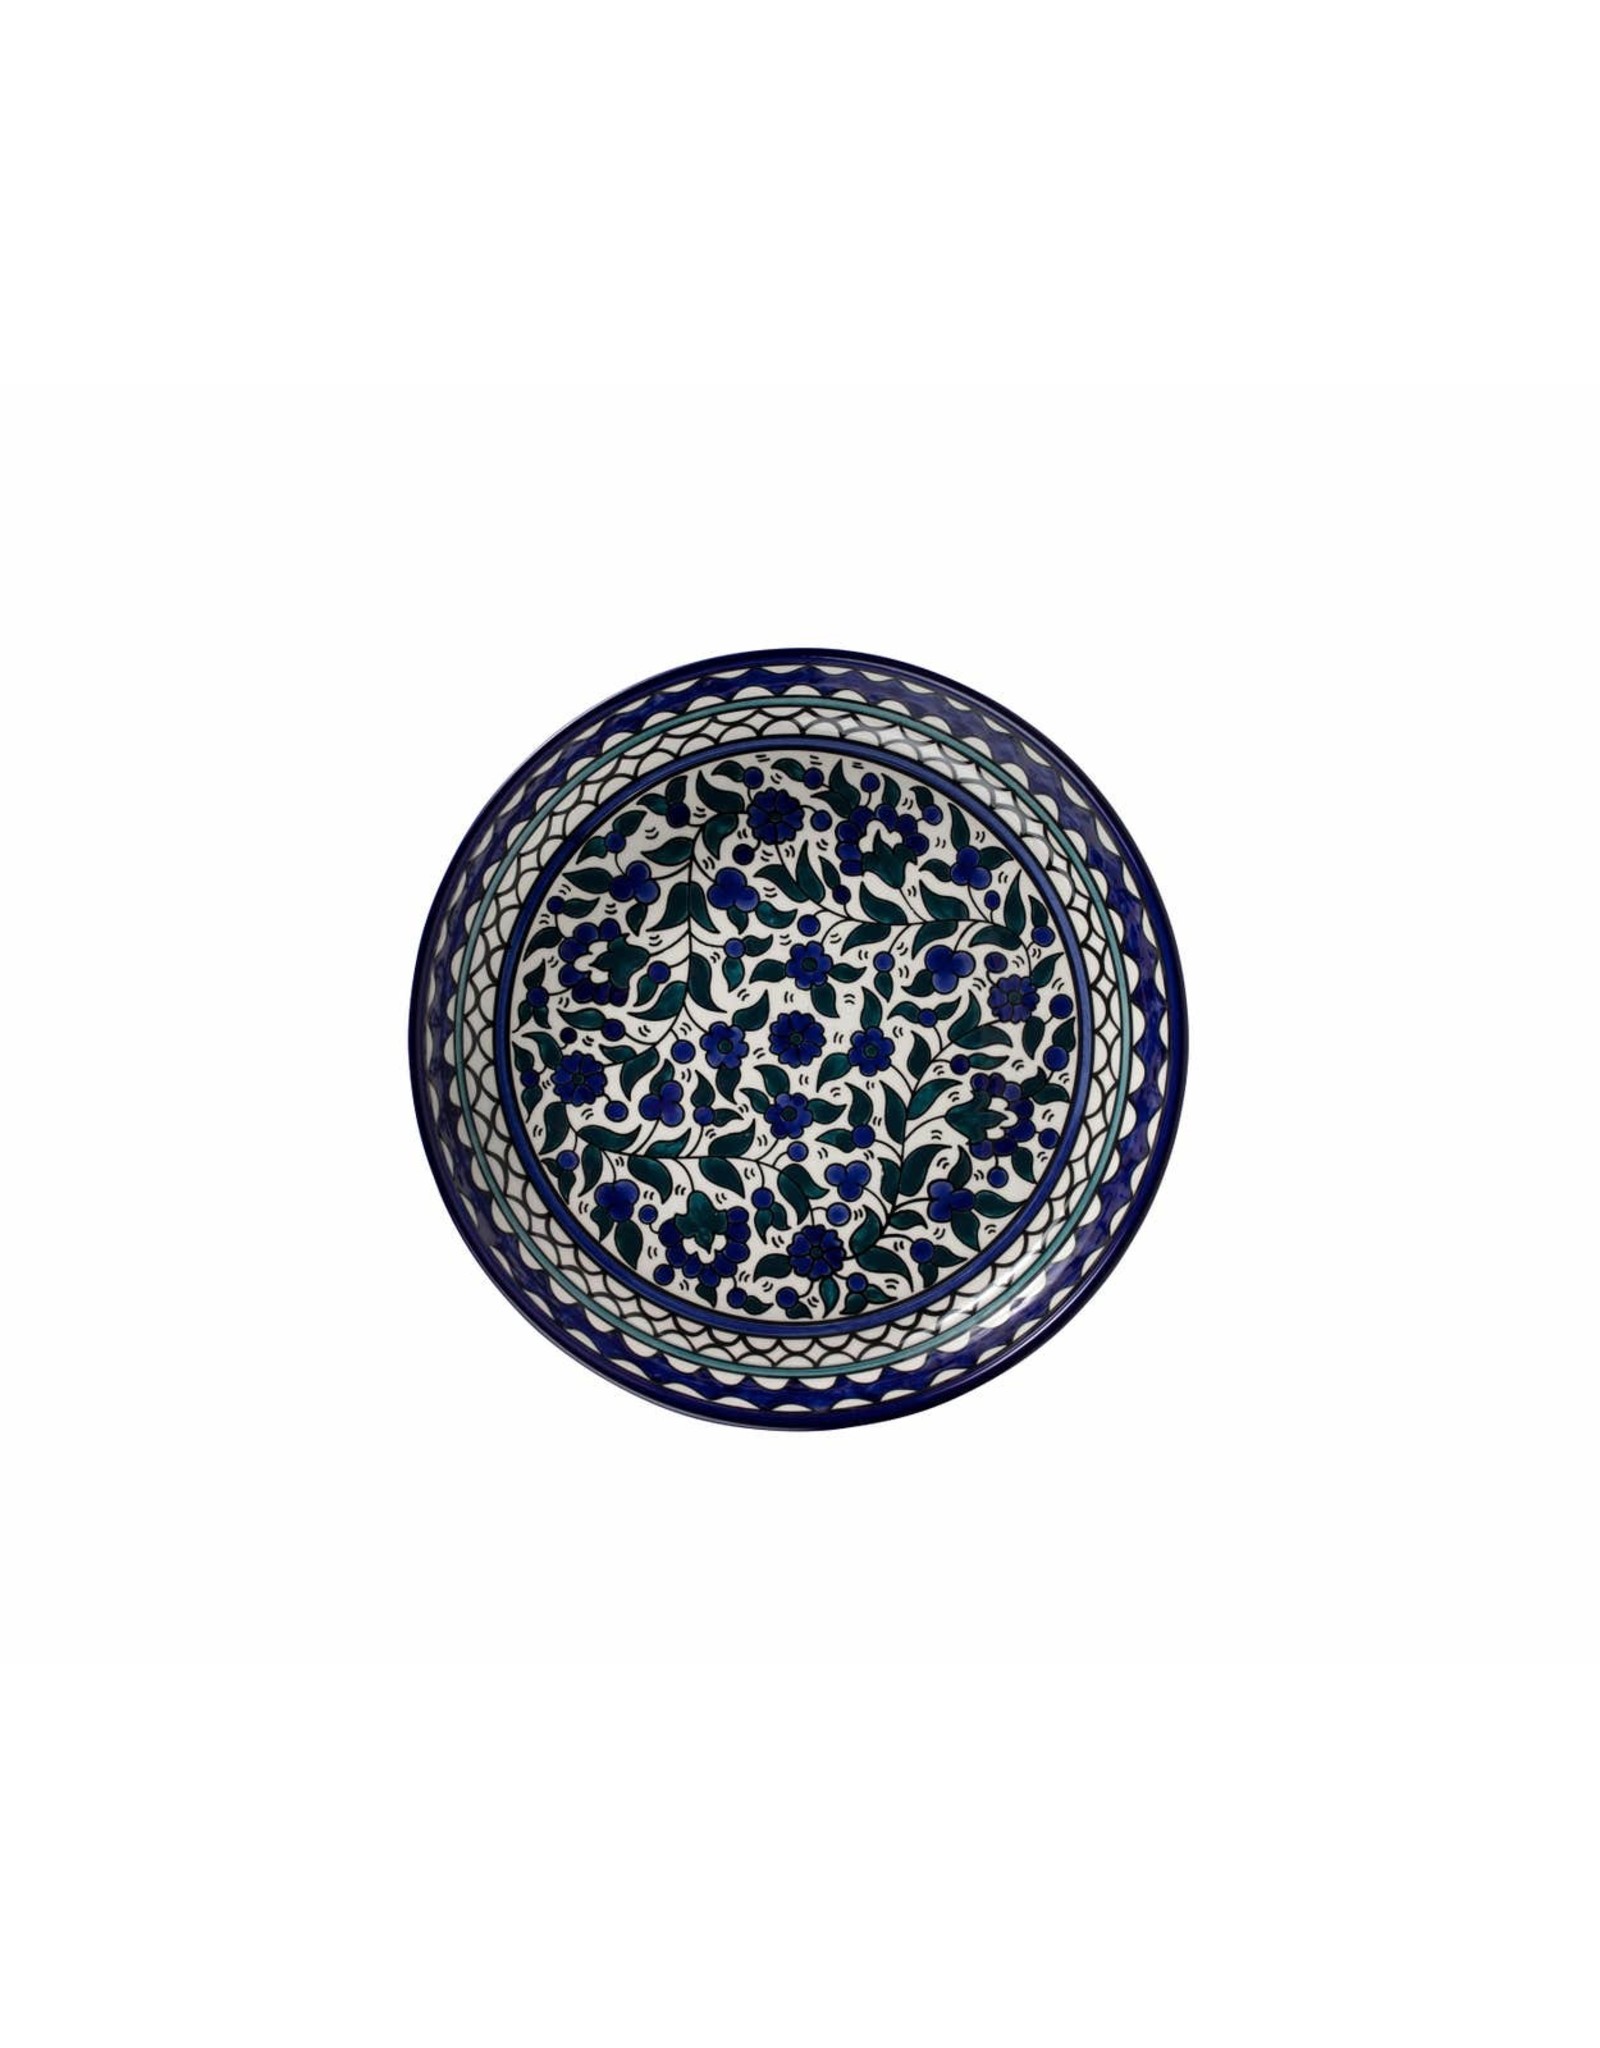 Blue Floral Platter/ Small Sided Bowl, West Bank